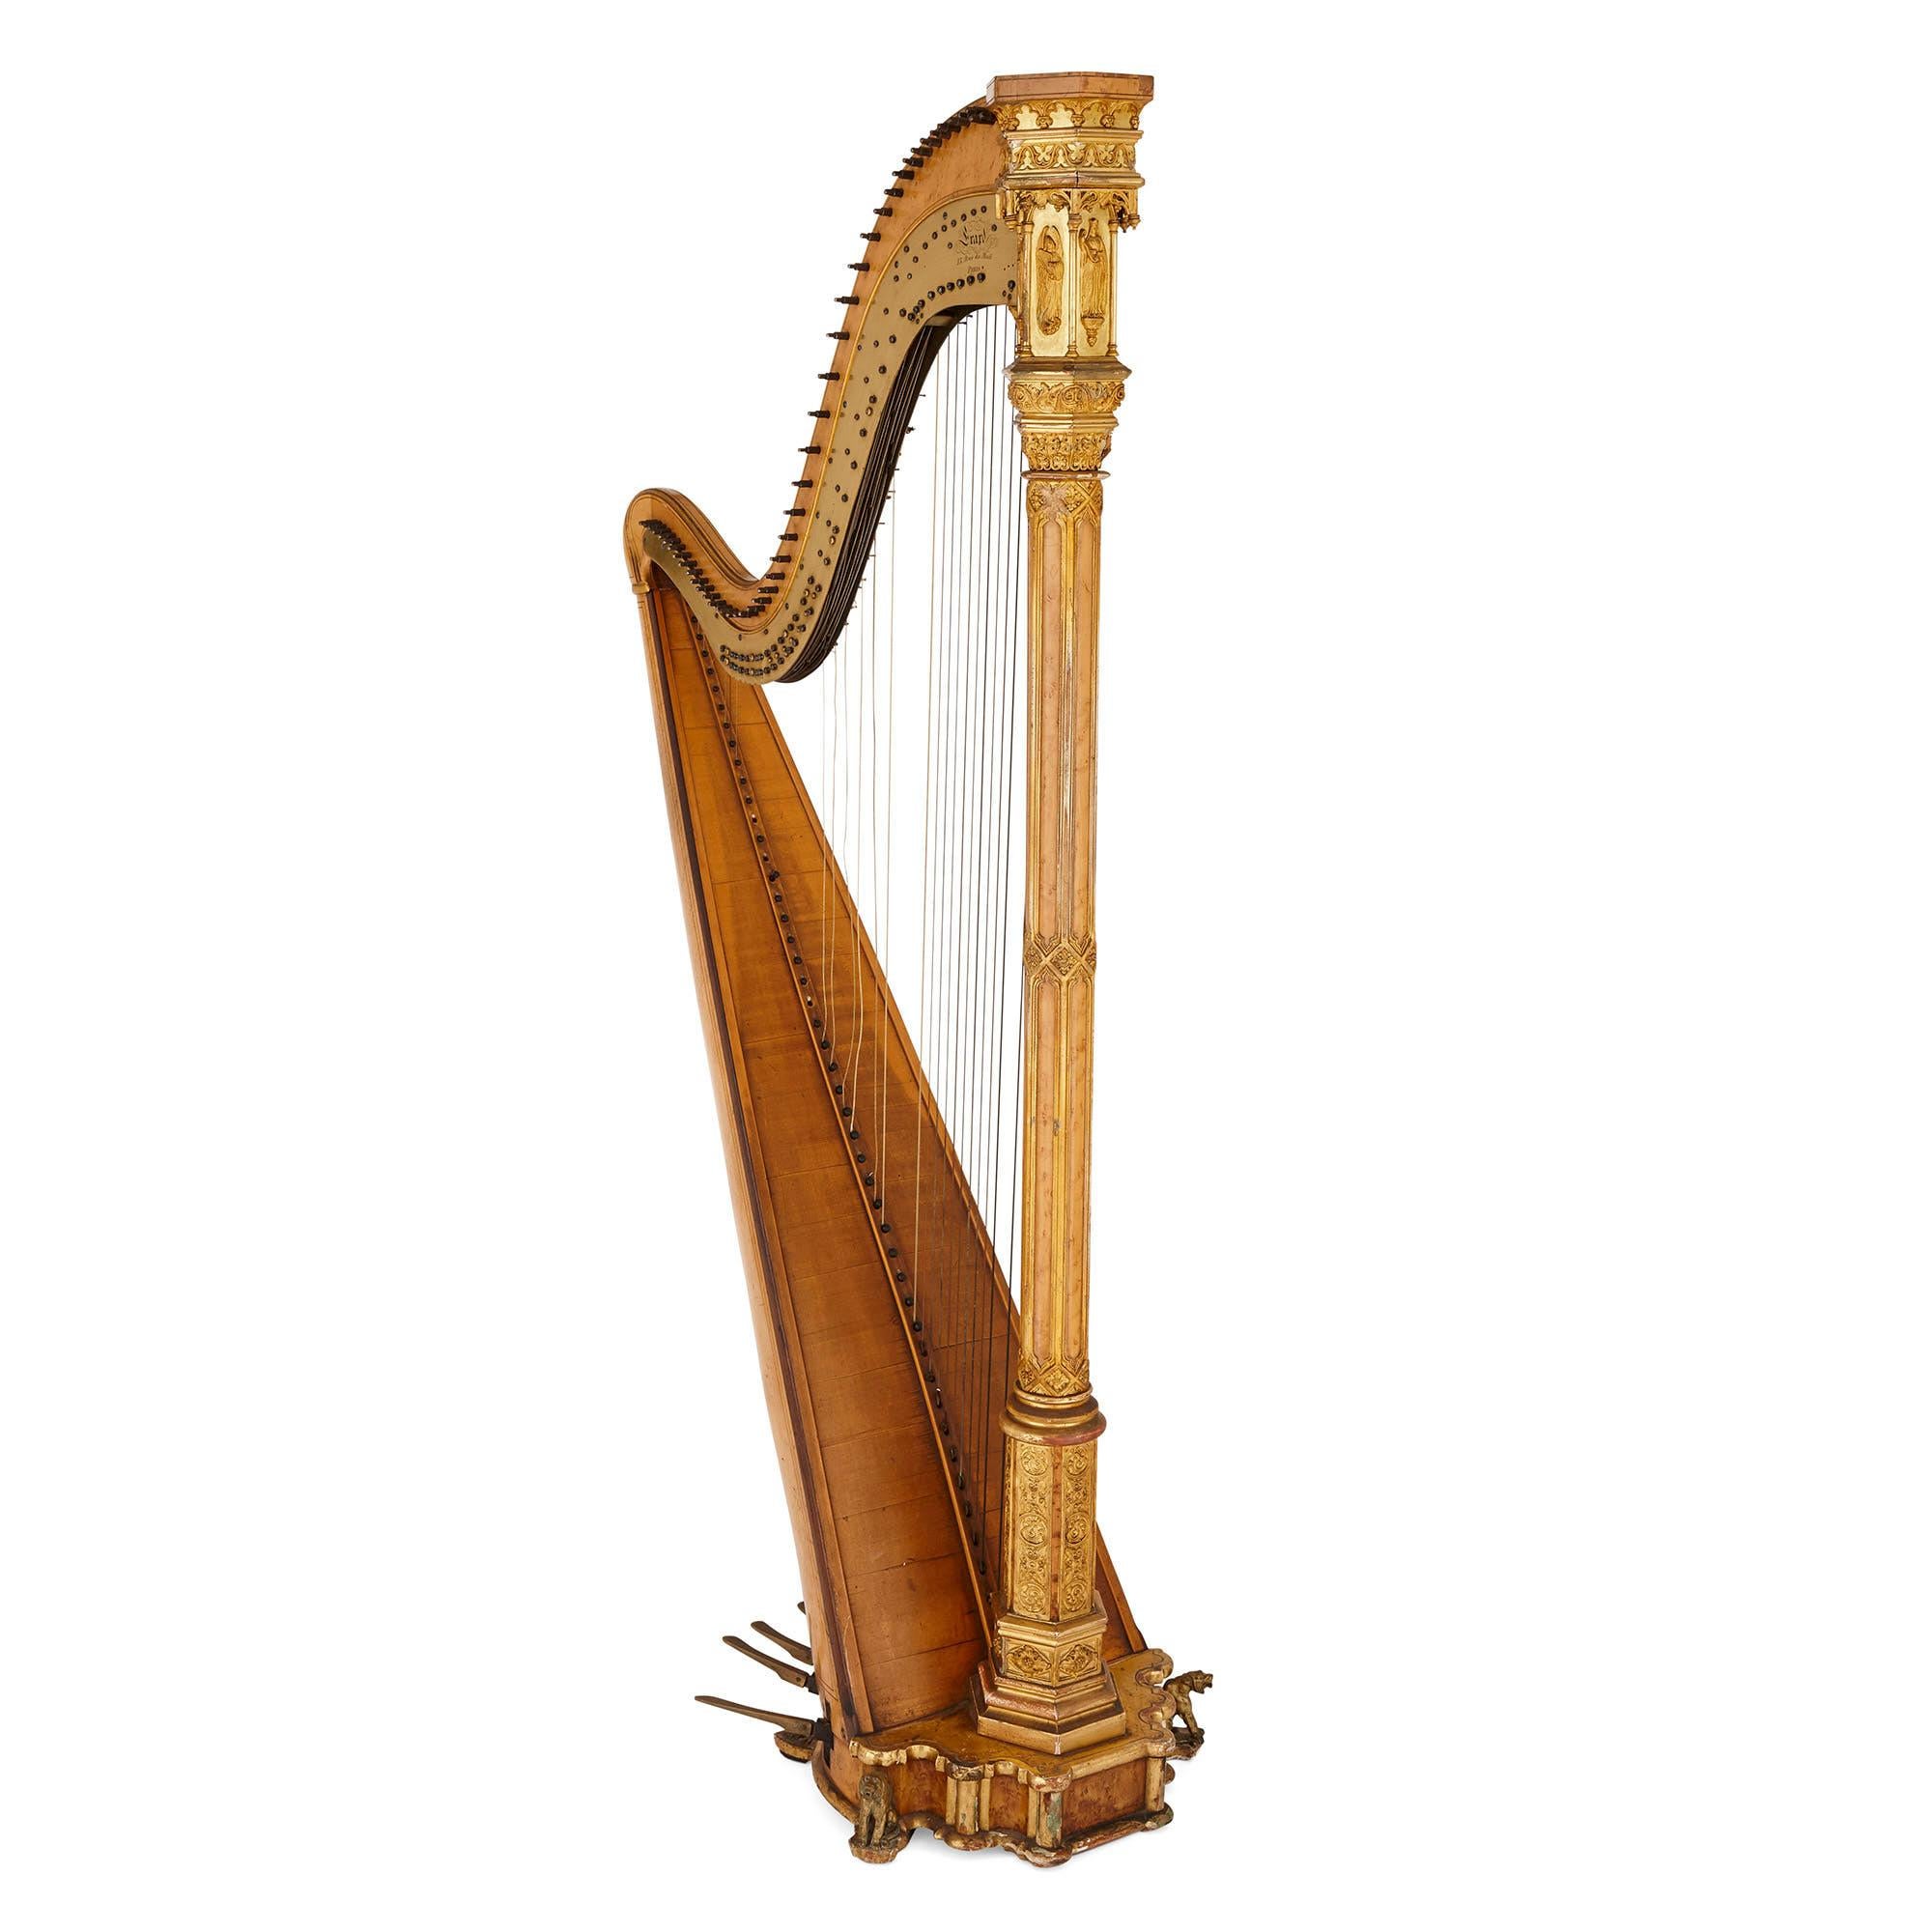 Antique Gothic Revival harp by Erard
French, circa 1840
Measures: Height 178cm, width 54cm, depth 91cm

Of typical form by the famed instrument maker Érard. With gilt highlights and set on four short feet, the front two as seated tigers.